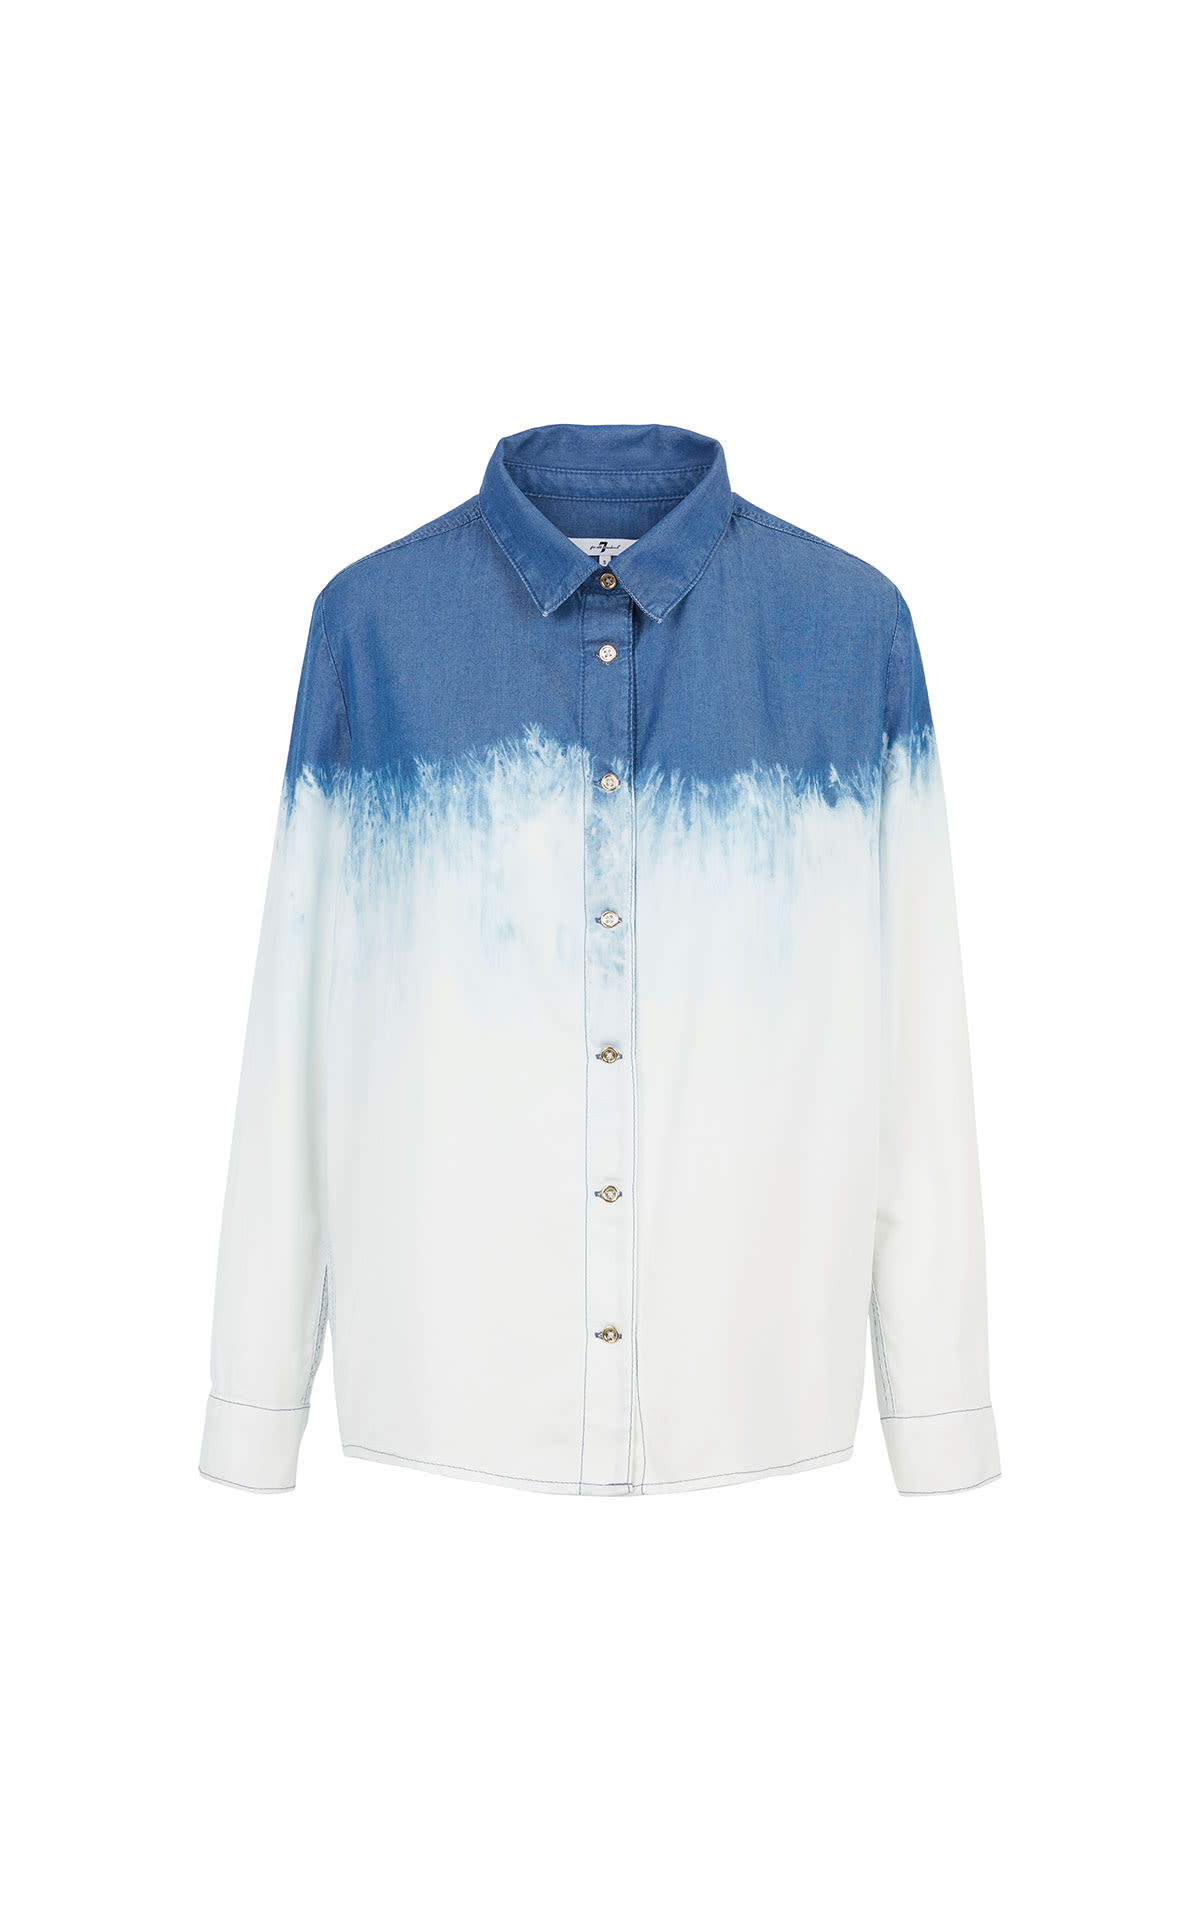 7 For All Mankind Marie shirt oceanside from Bicester Village